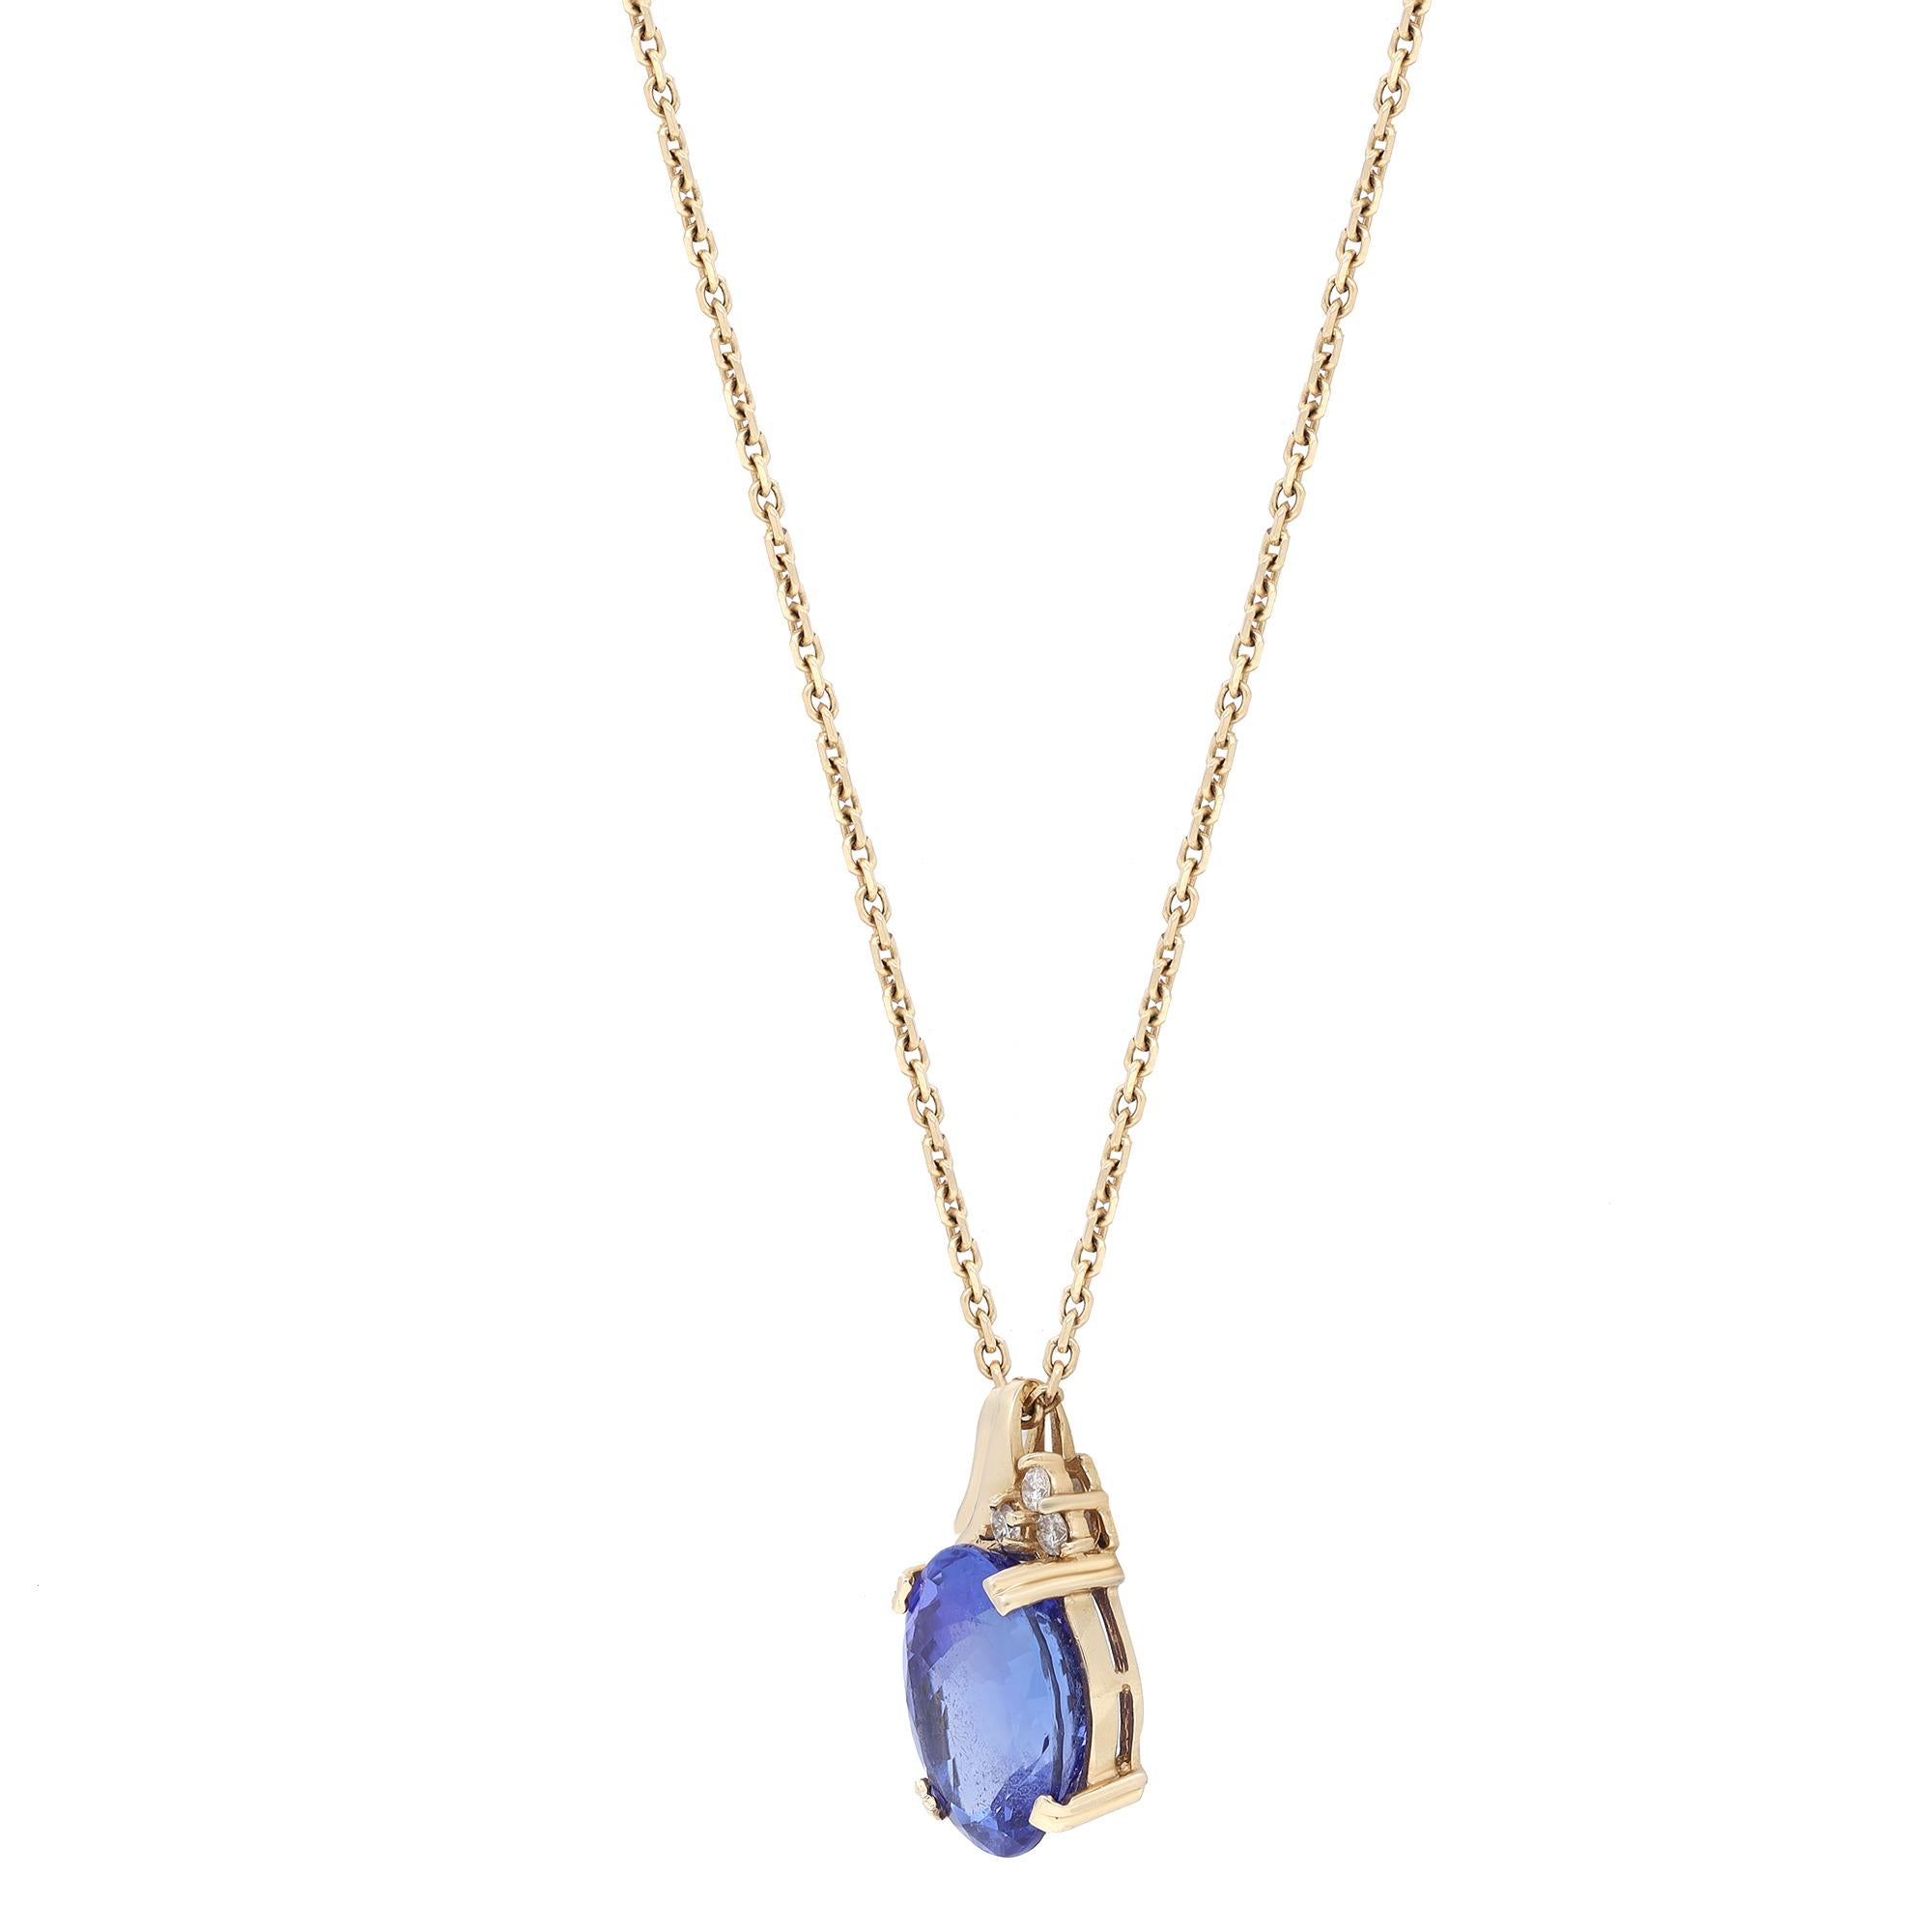 Oval Cut 11.00cttw Tanzanite & Diamond Pendant Necklace 14K Yellow Gold For Sale